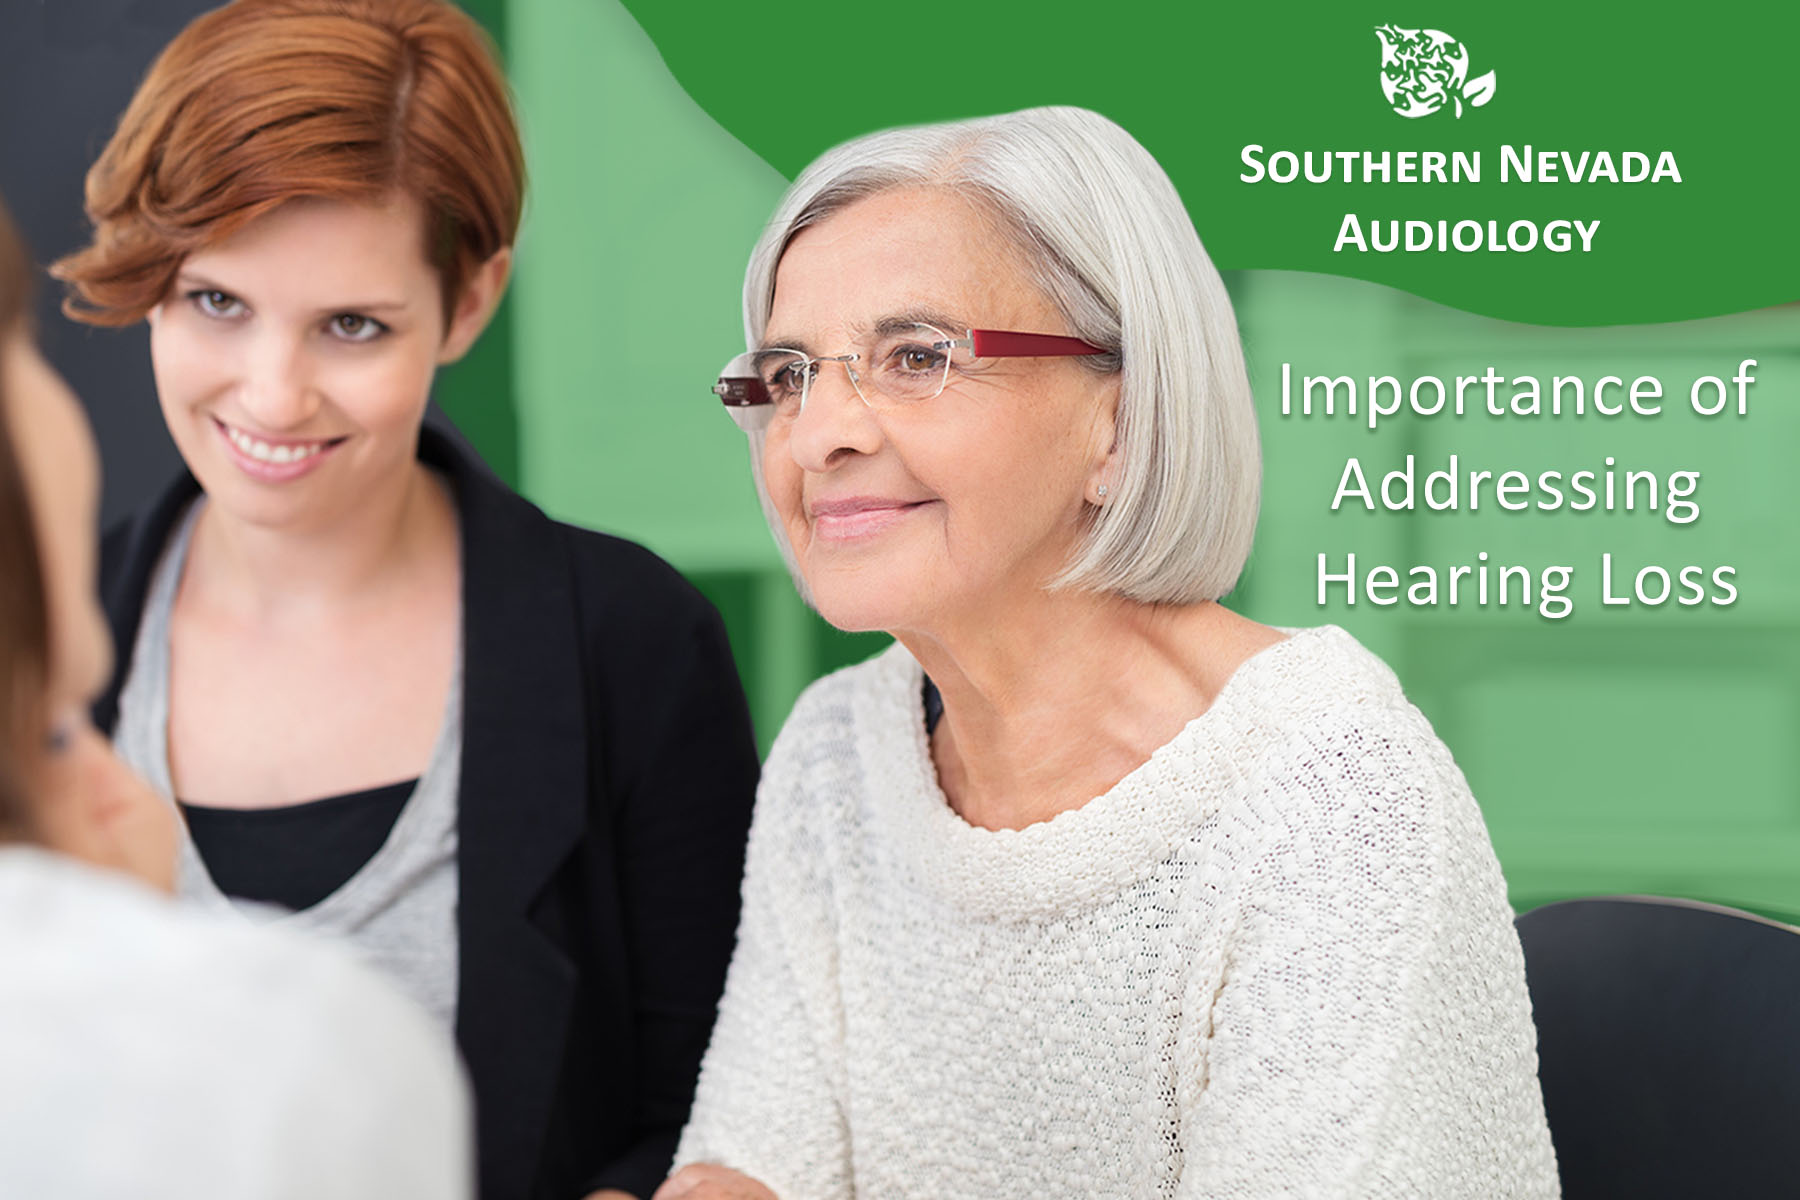 Importance of Addressing Hearing Loss